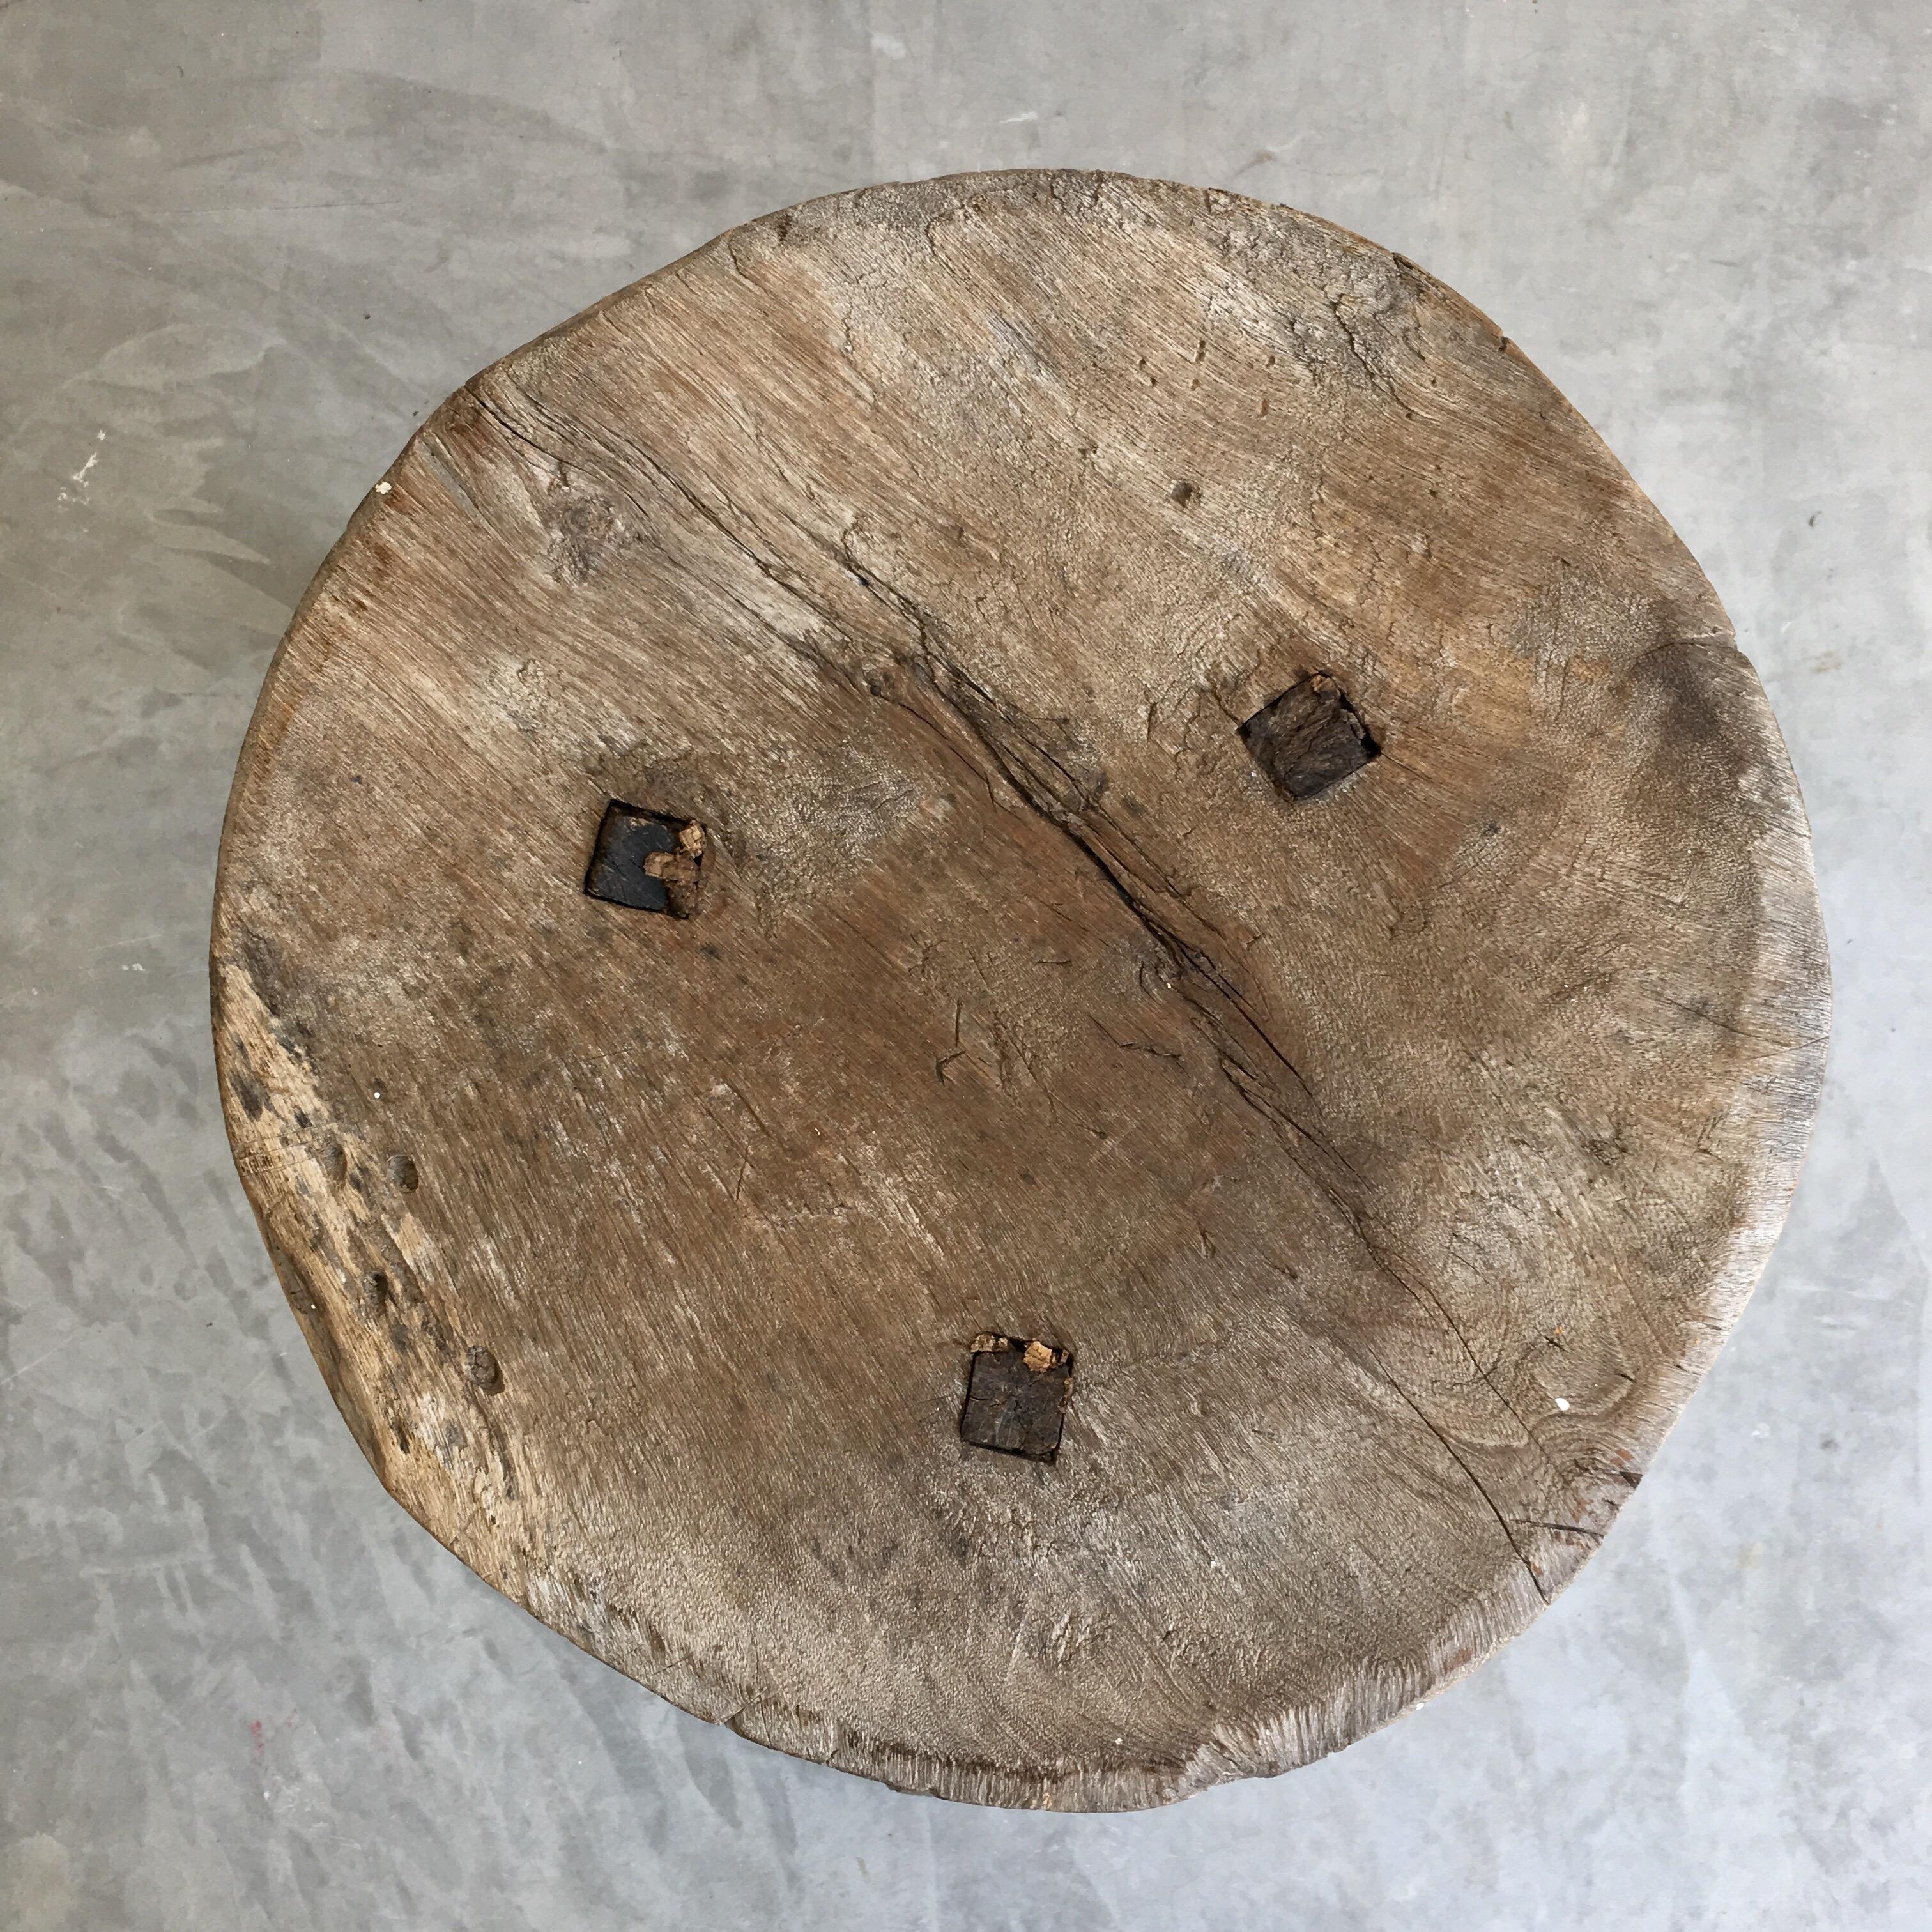 Rustic Mesquite Stool from Mexico